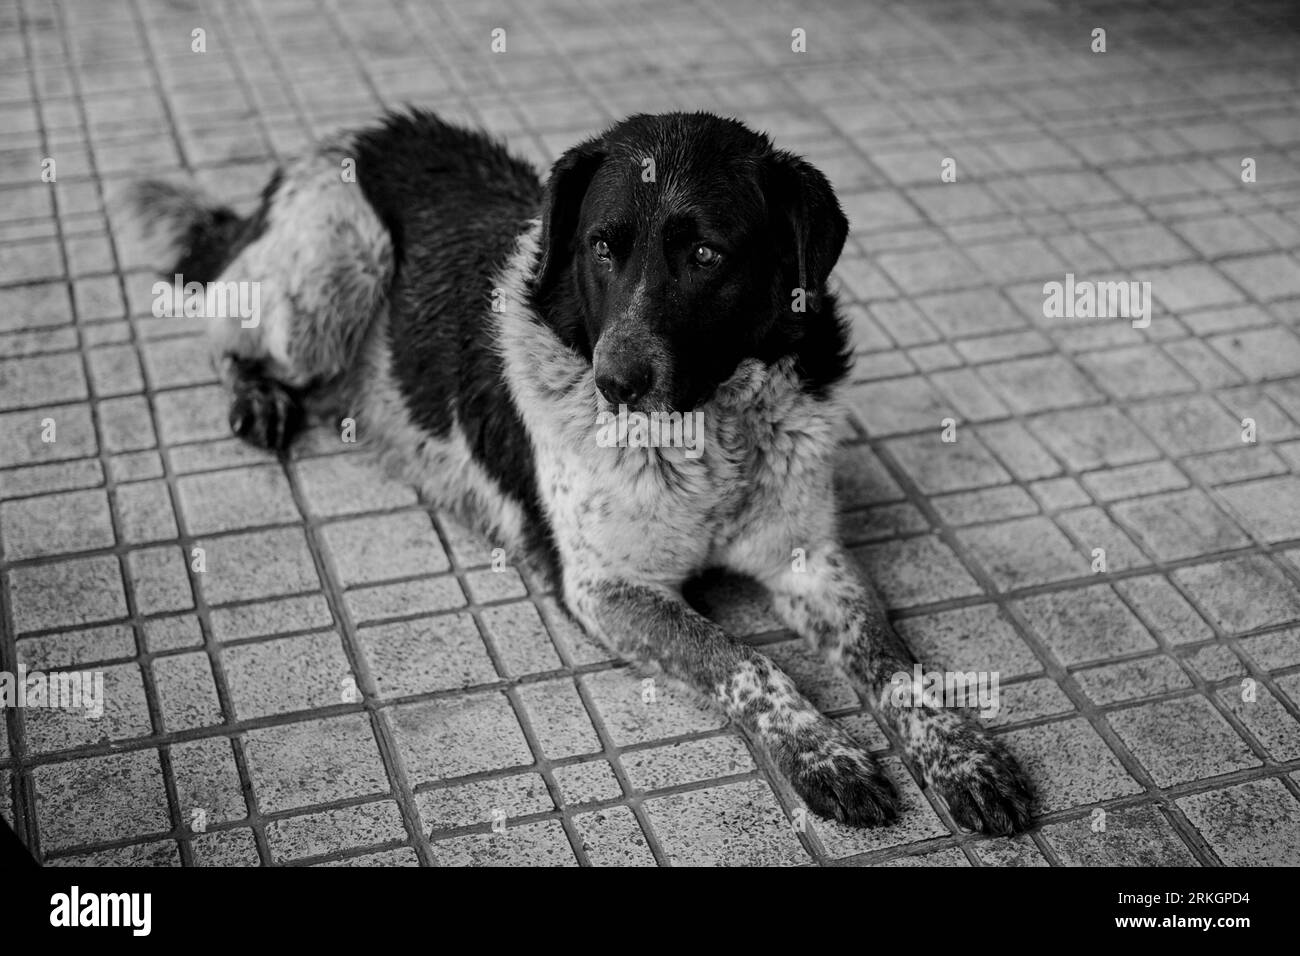 A medium-sized canine lounging contentedly on a grey flooring surface Stock Photo